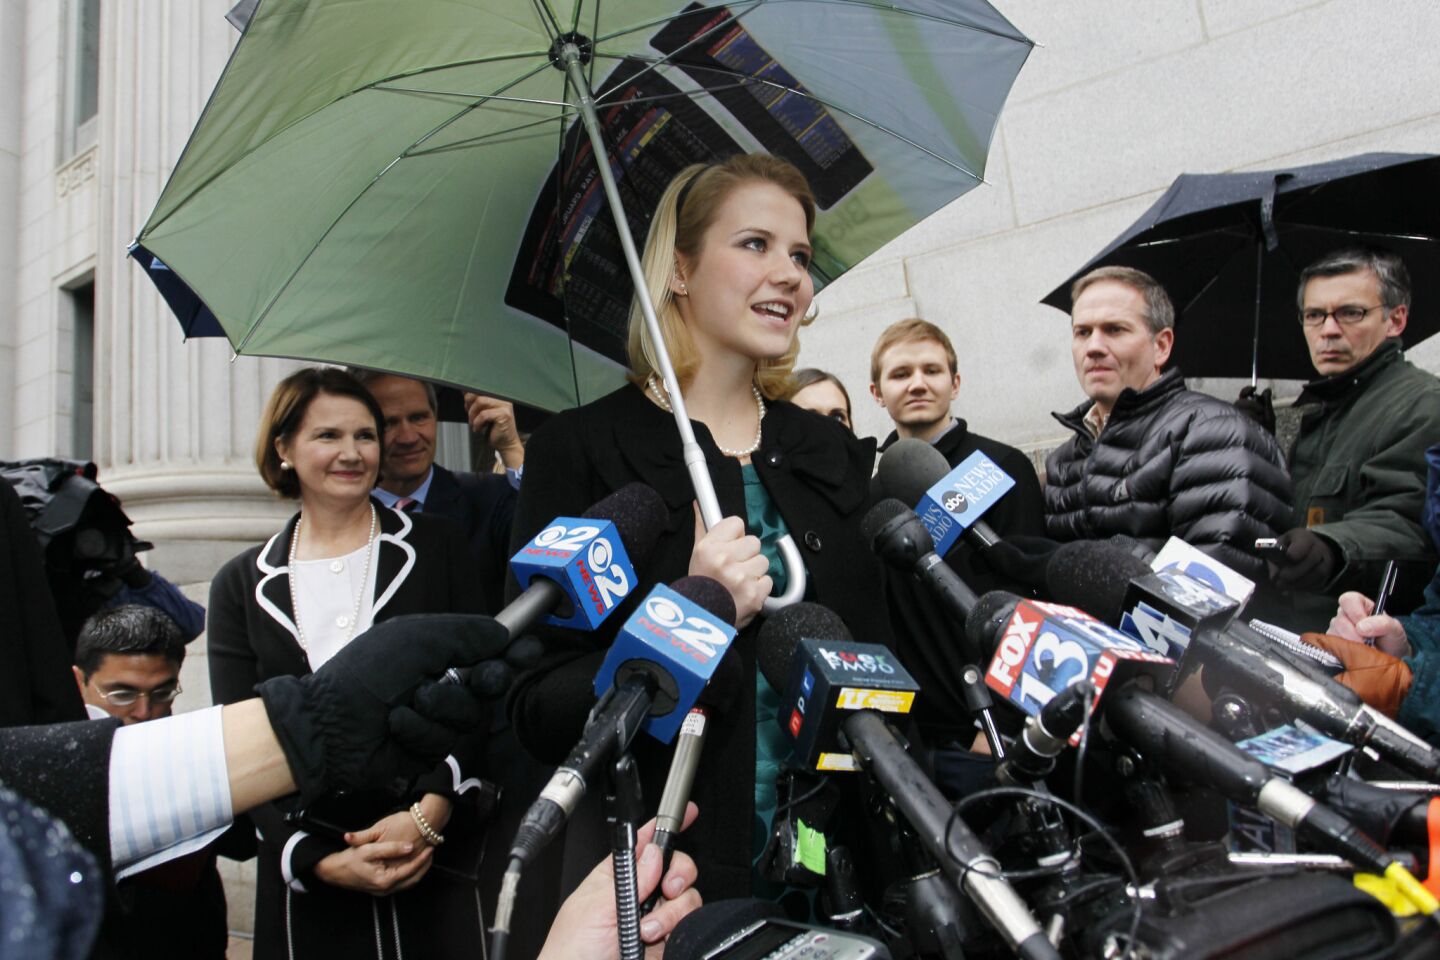 Elizabeth Smart addresses the media outside a federal courthouse following the guilty verdict in the Brian David Mitchell trail in Salt Lake City. Mitchell was found guilty in the June 5, 2002, kidnapping of Elizabeth Smart.